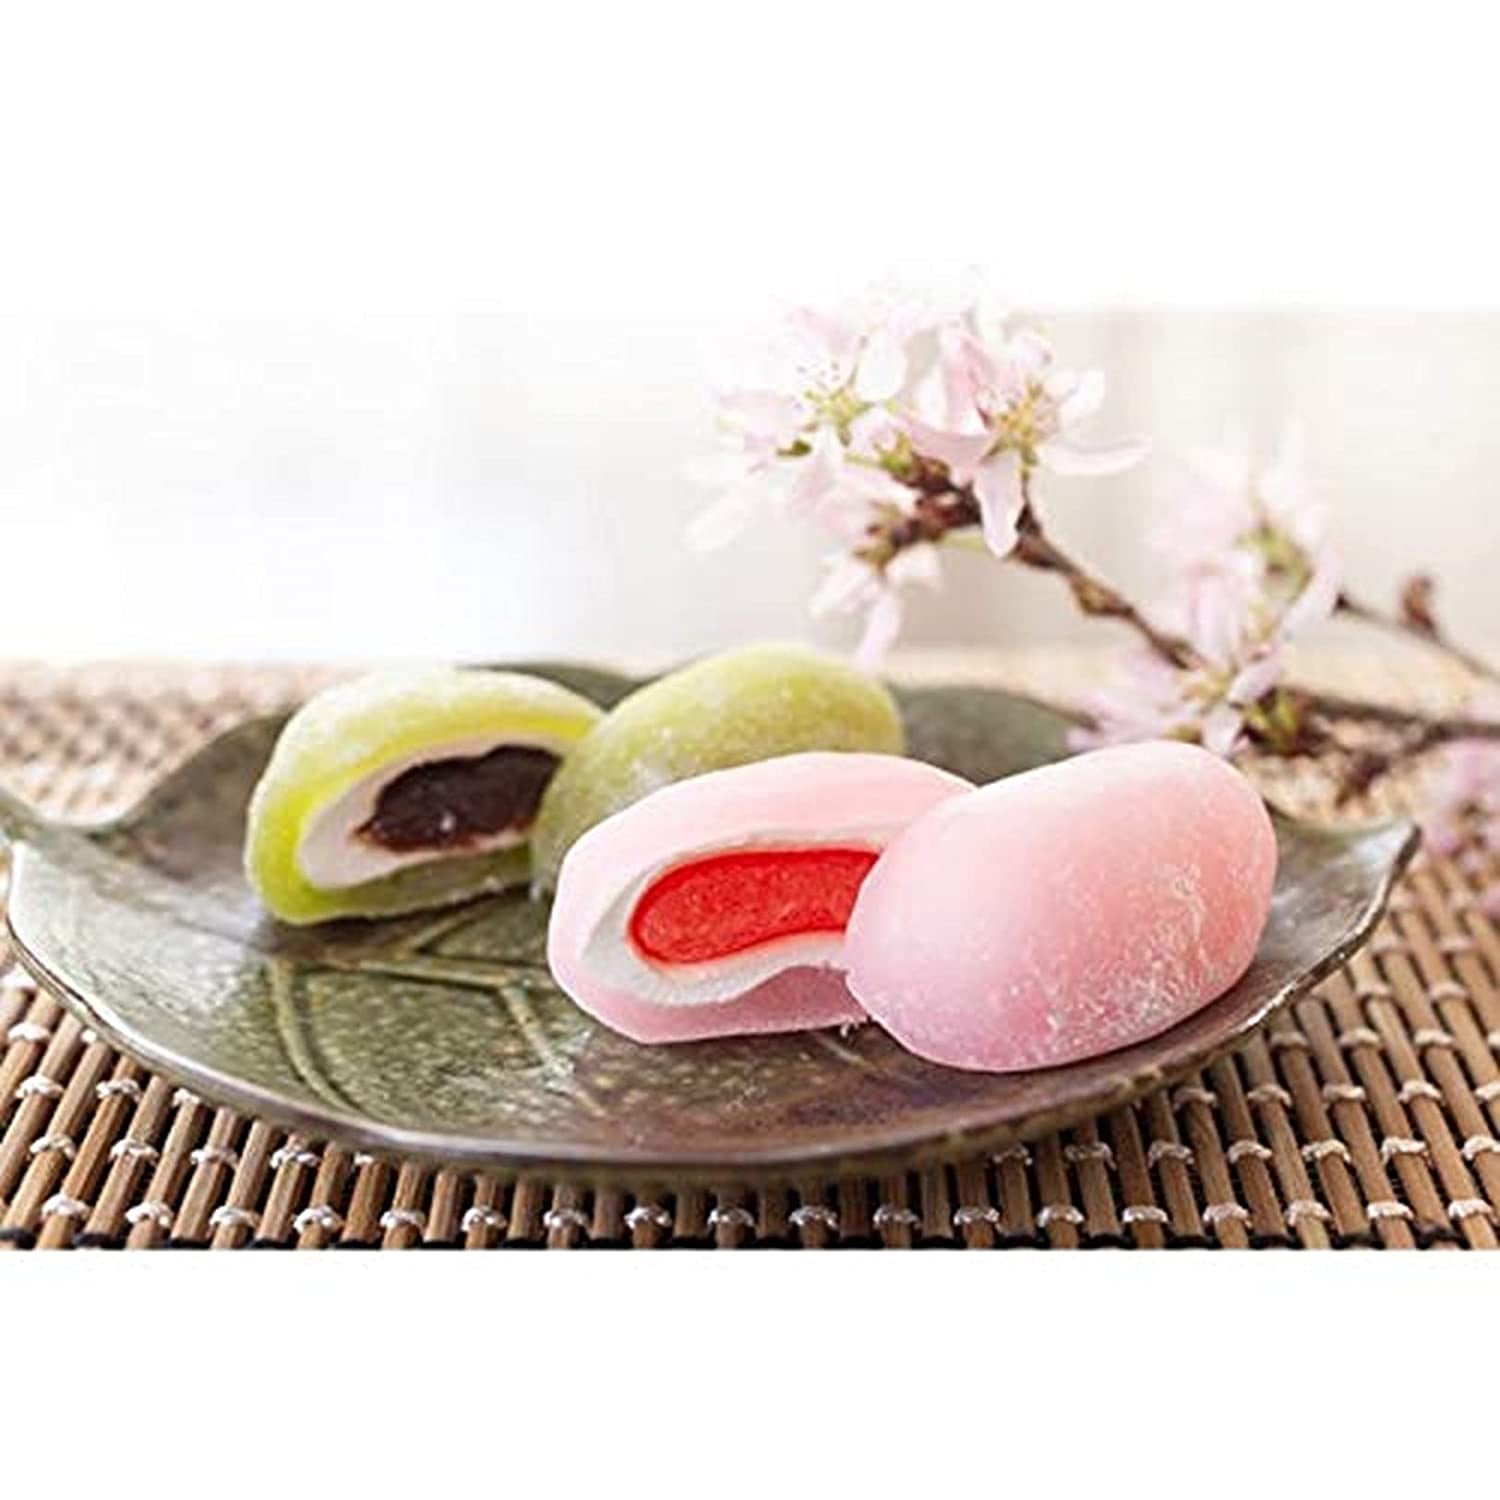 Mochi is a Japanese rice cake made of glutinous rice pounded into... News  Photo - Getty Images